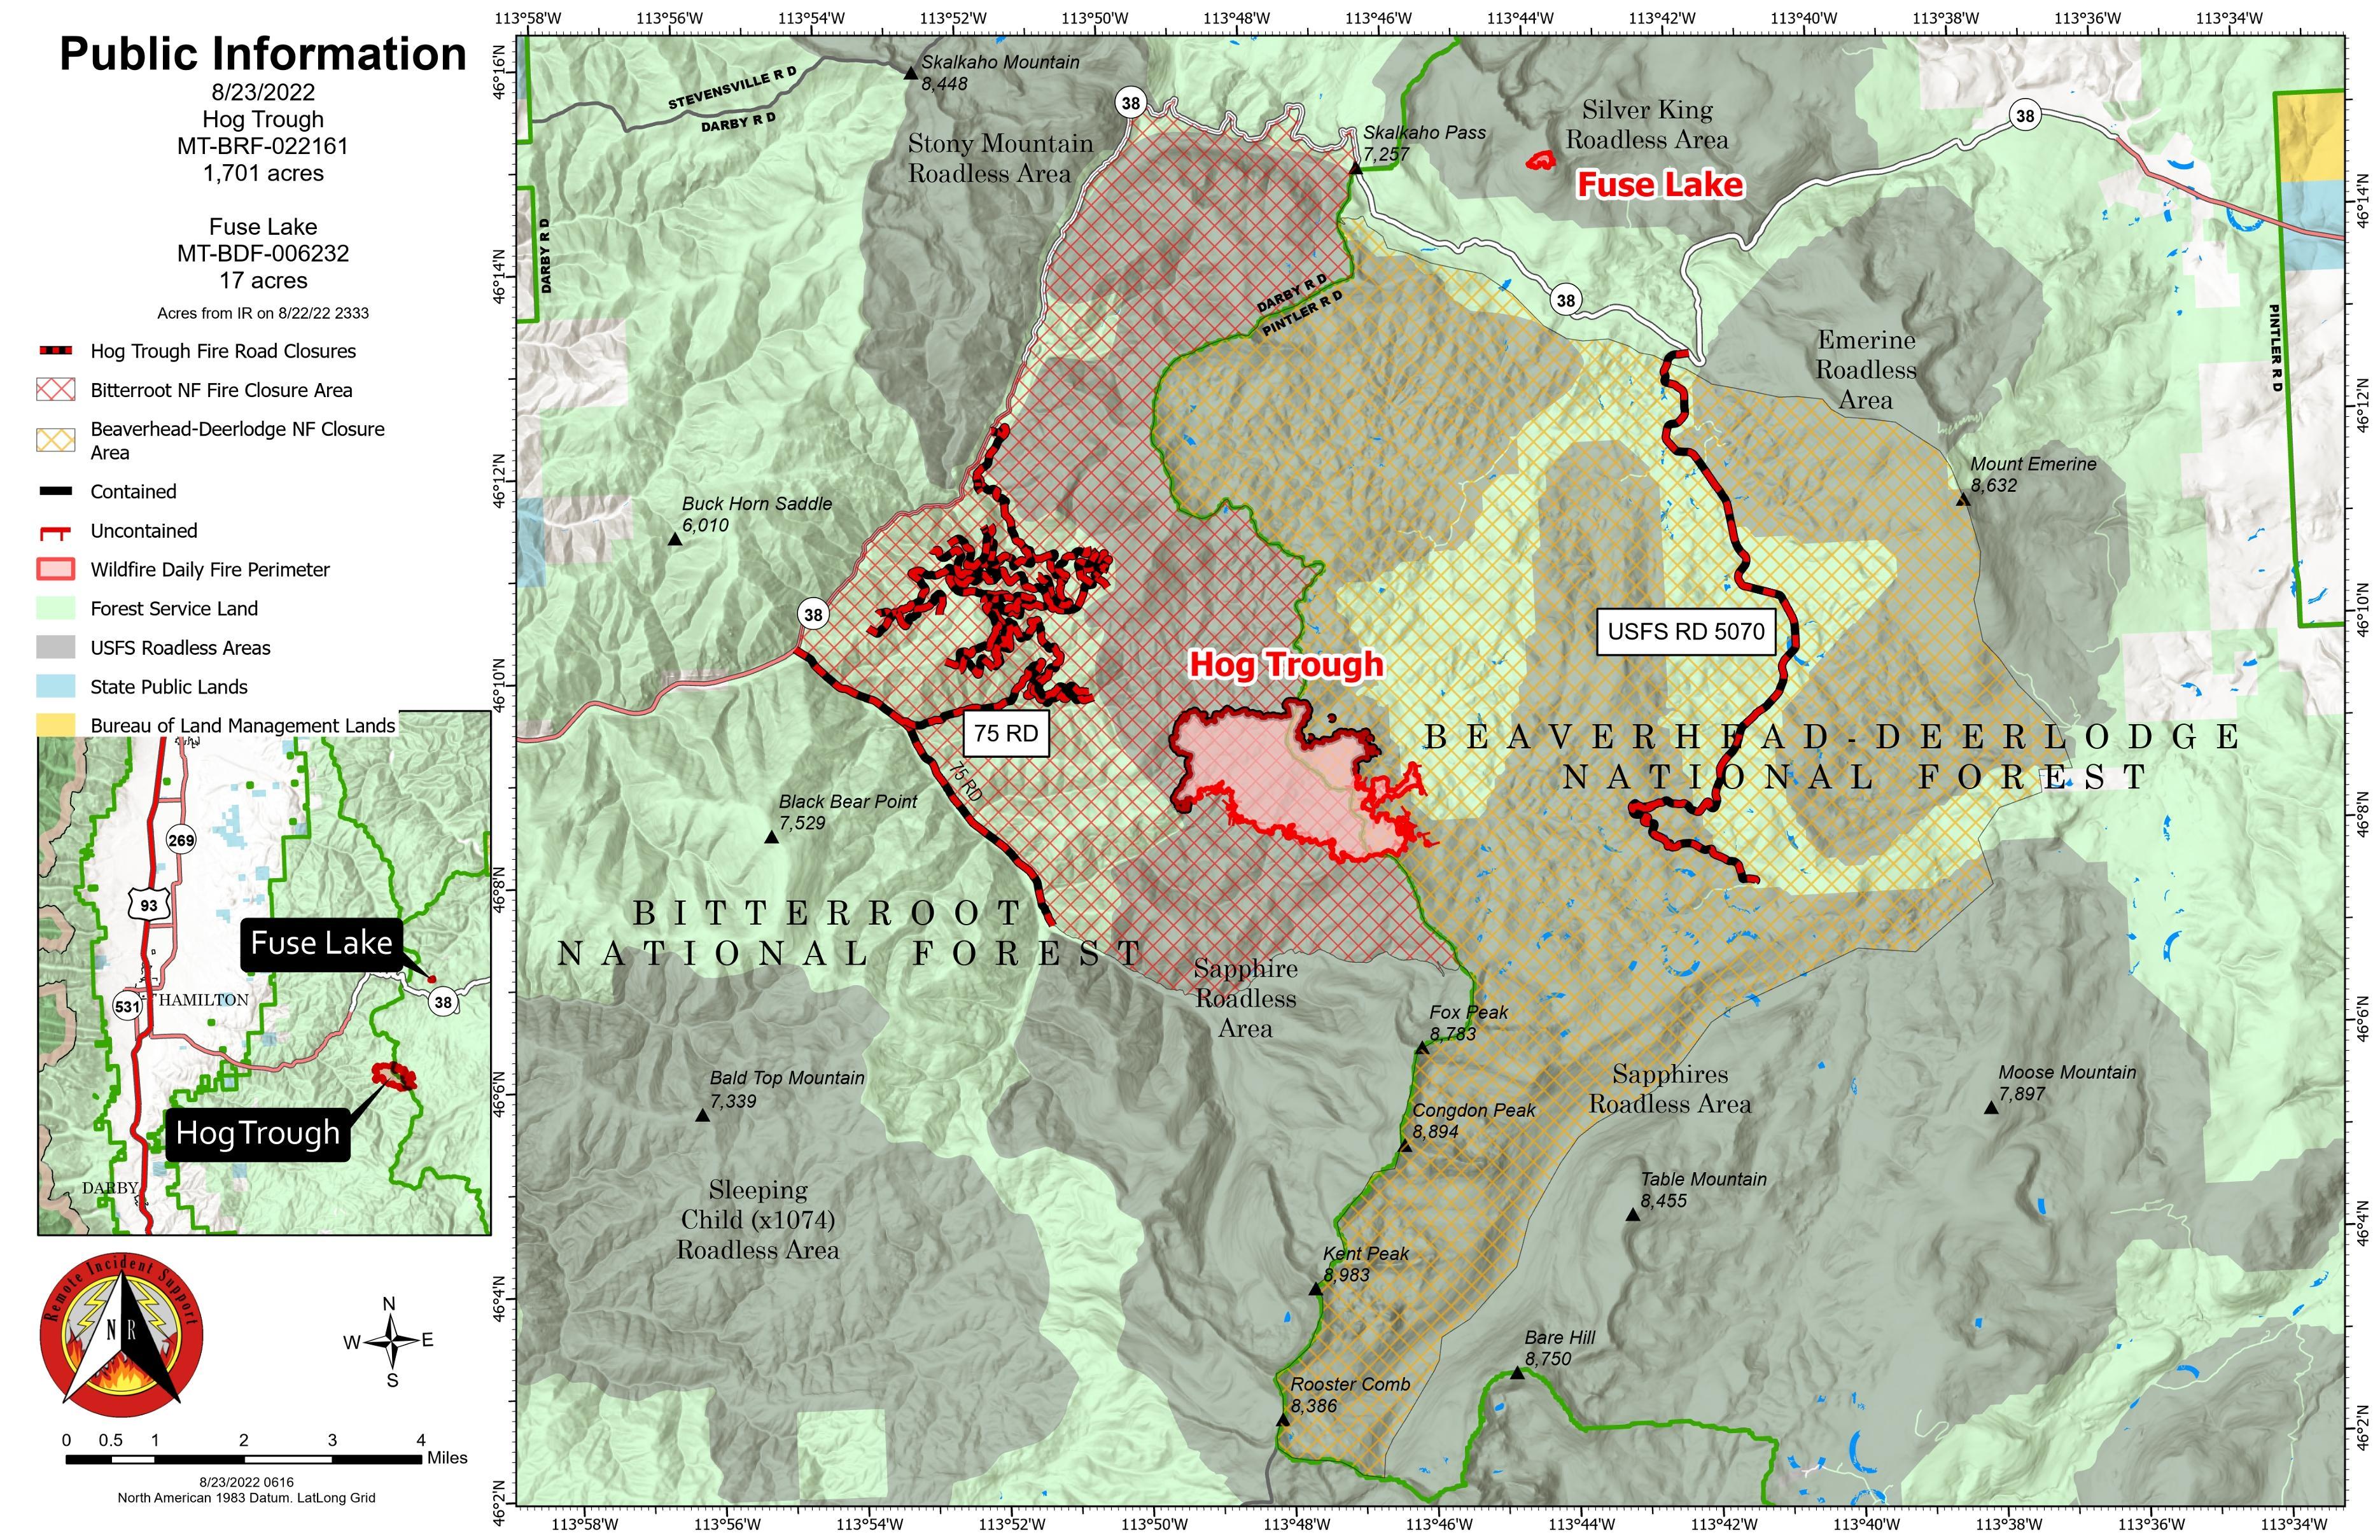 Hog Trough Fire map for August 23, 2022